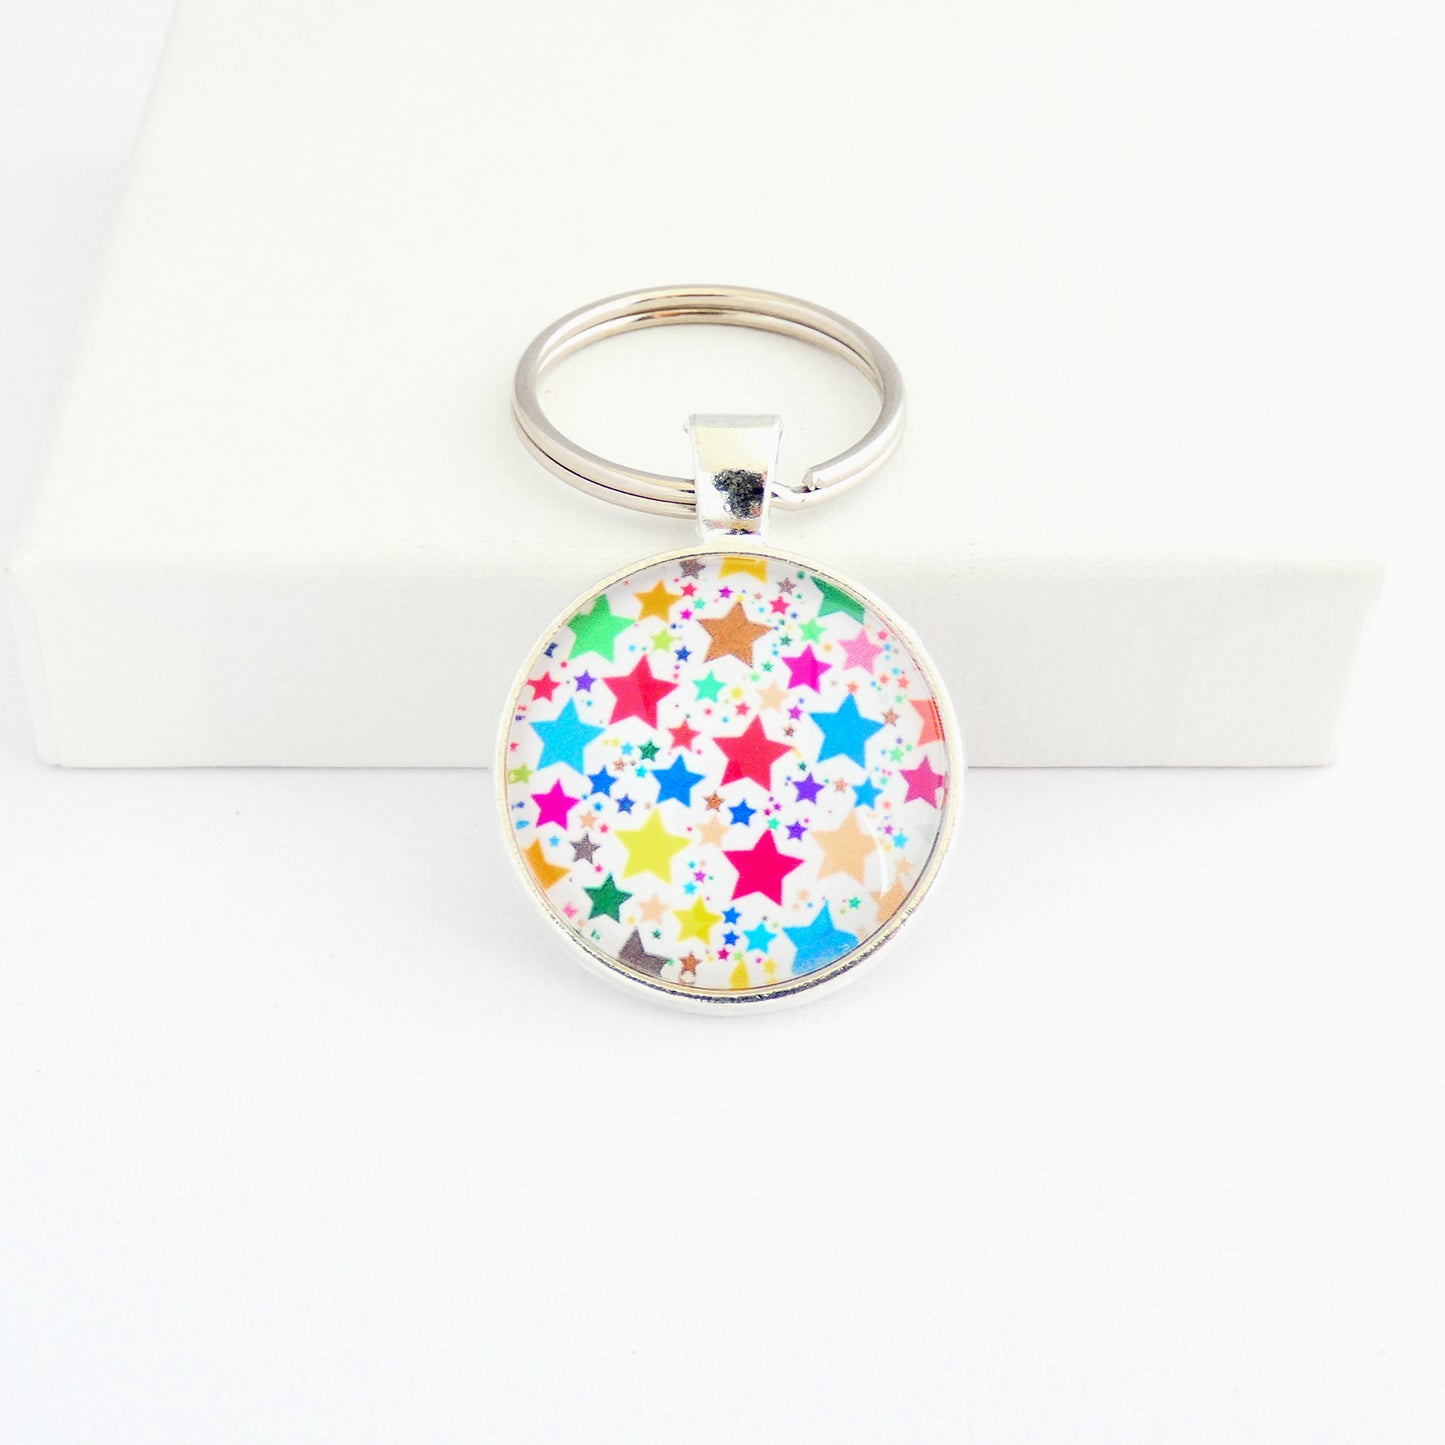 A round shaped silver toned metal keyring with a colourful star pattern design capped wtih a clear glass cabochon